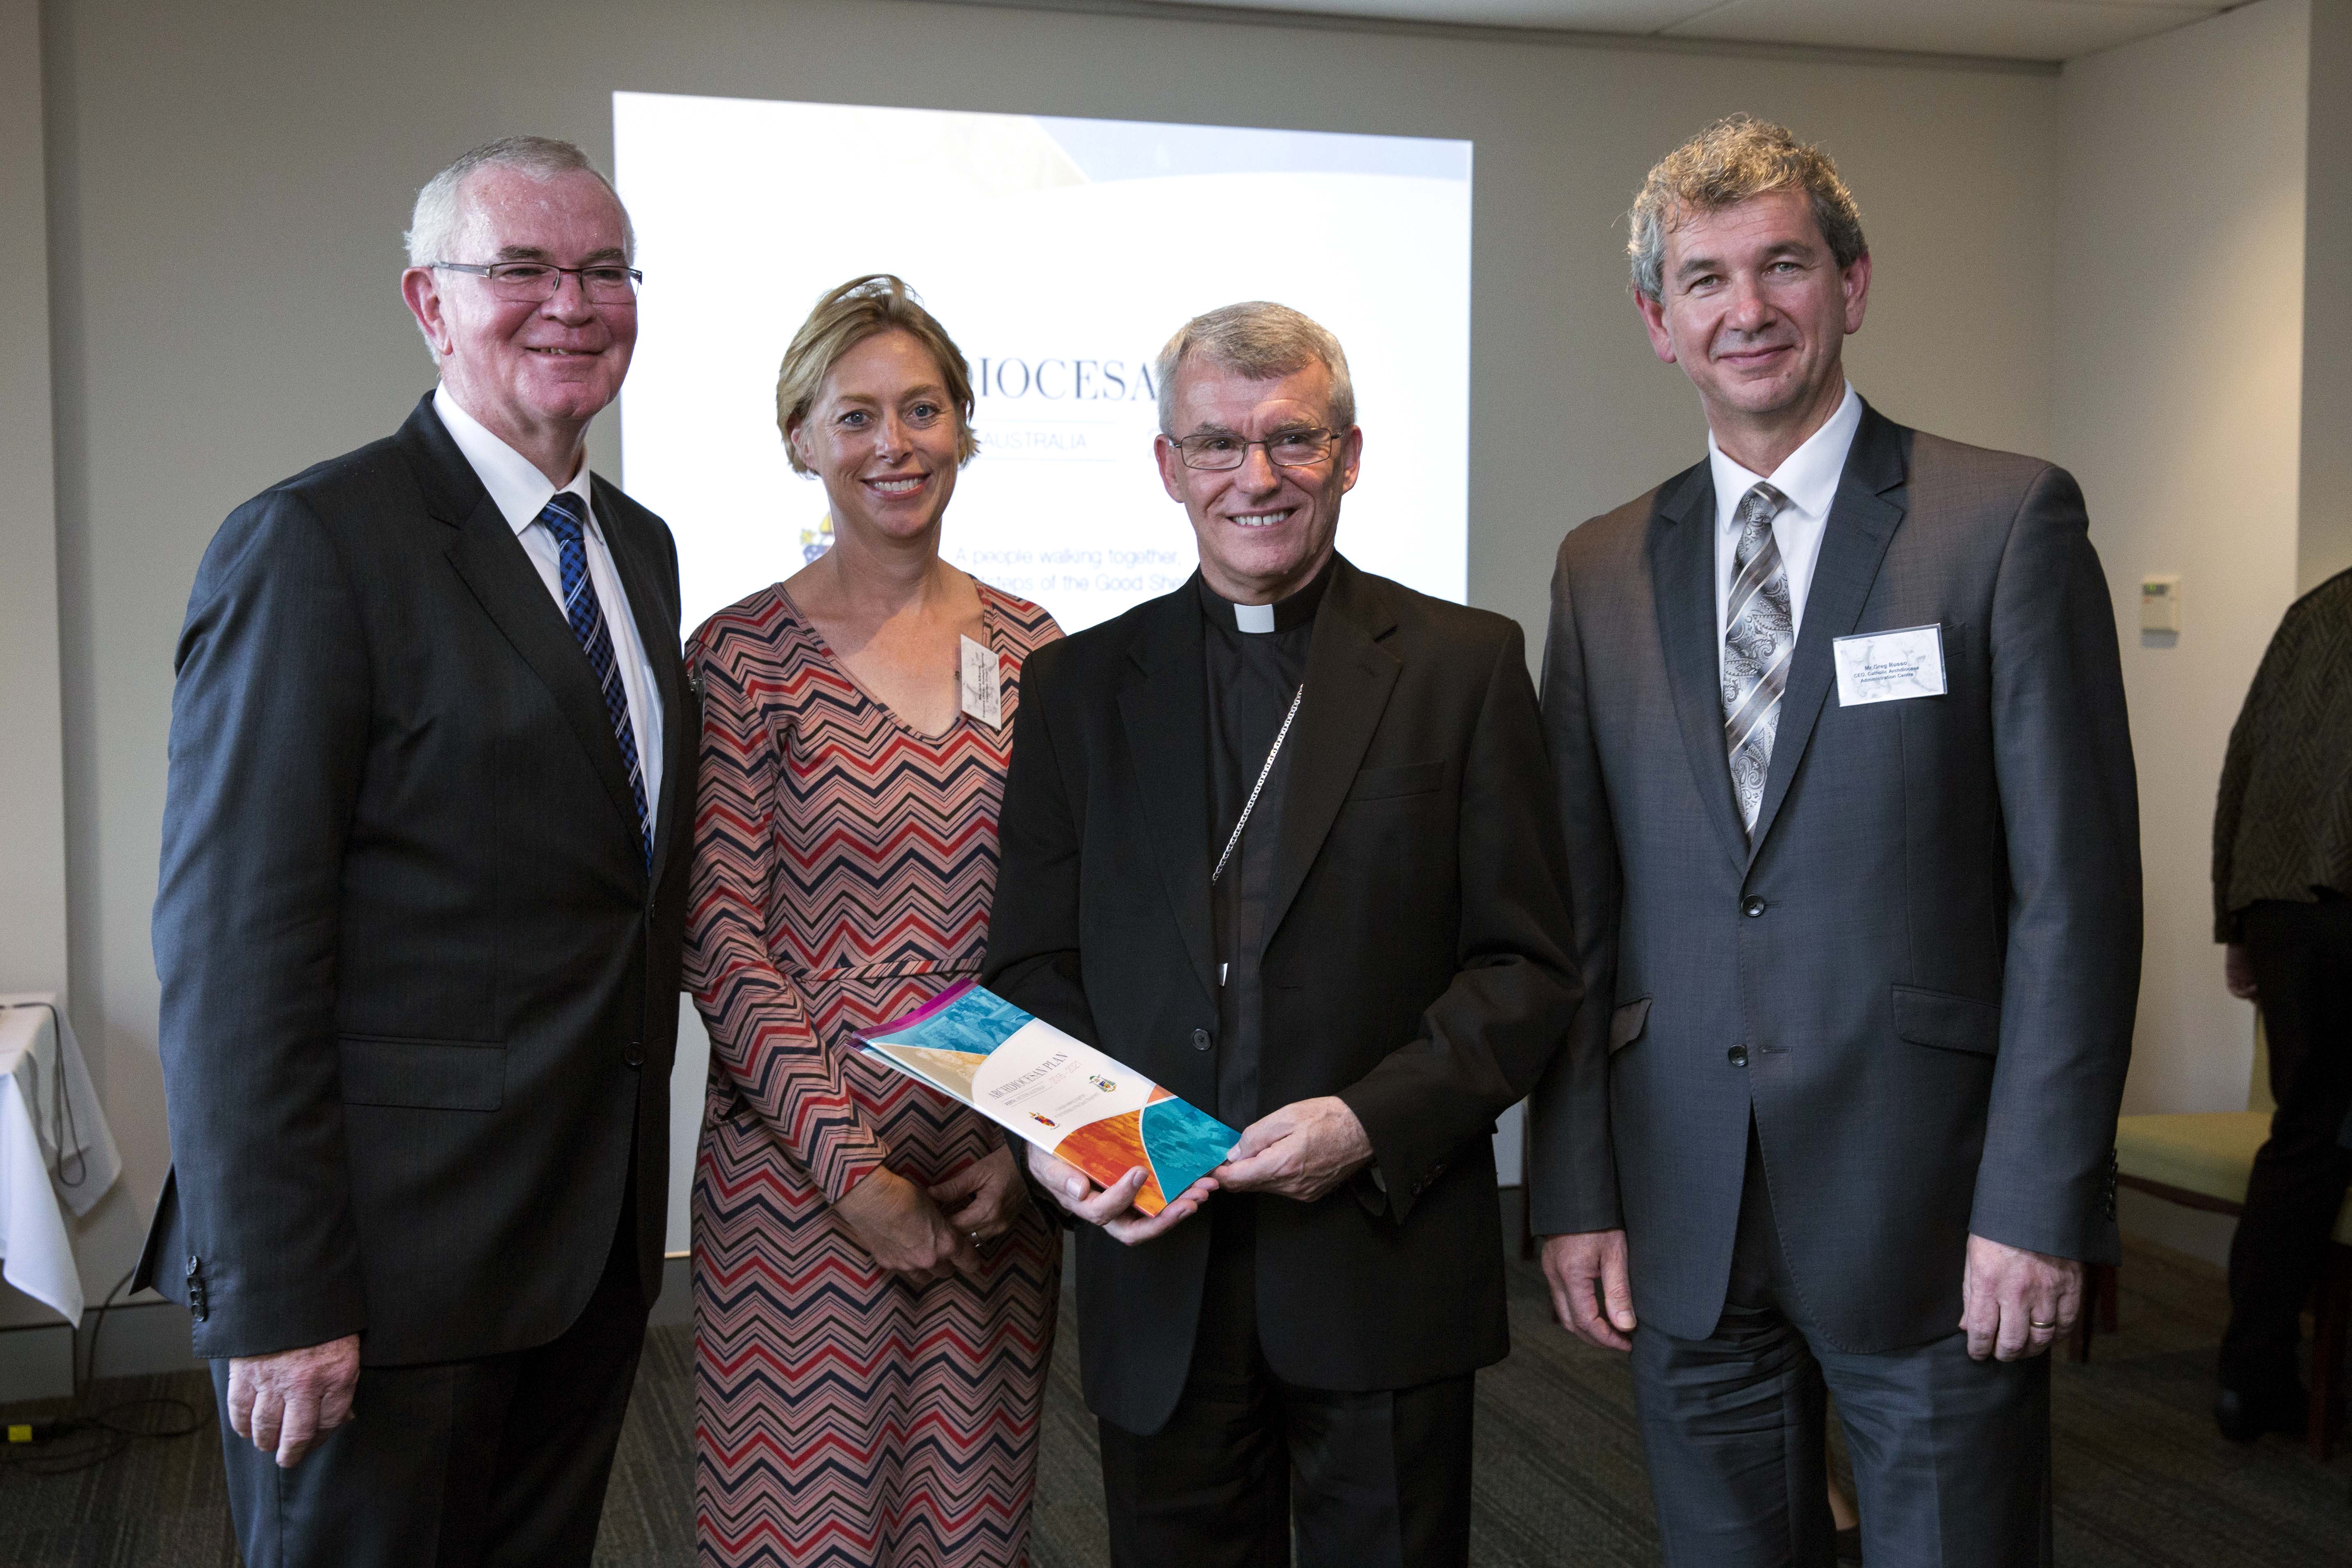 The Archdiocesan Plan Co-ordinating Group Chair, Danny Murphy; Executive Officer, Jane Kikeros; Archbishop Timothy Costelloe; and Archdiocese of Perth CEO-Administration, Greg Russo. Photo: Ron Tan.